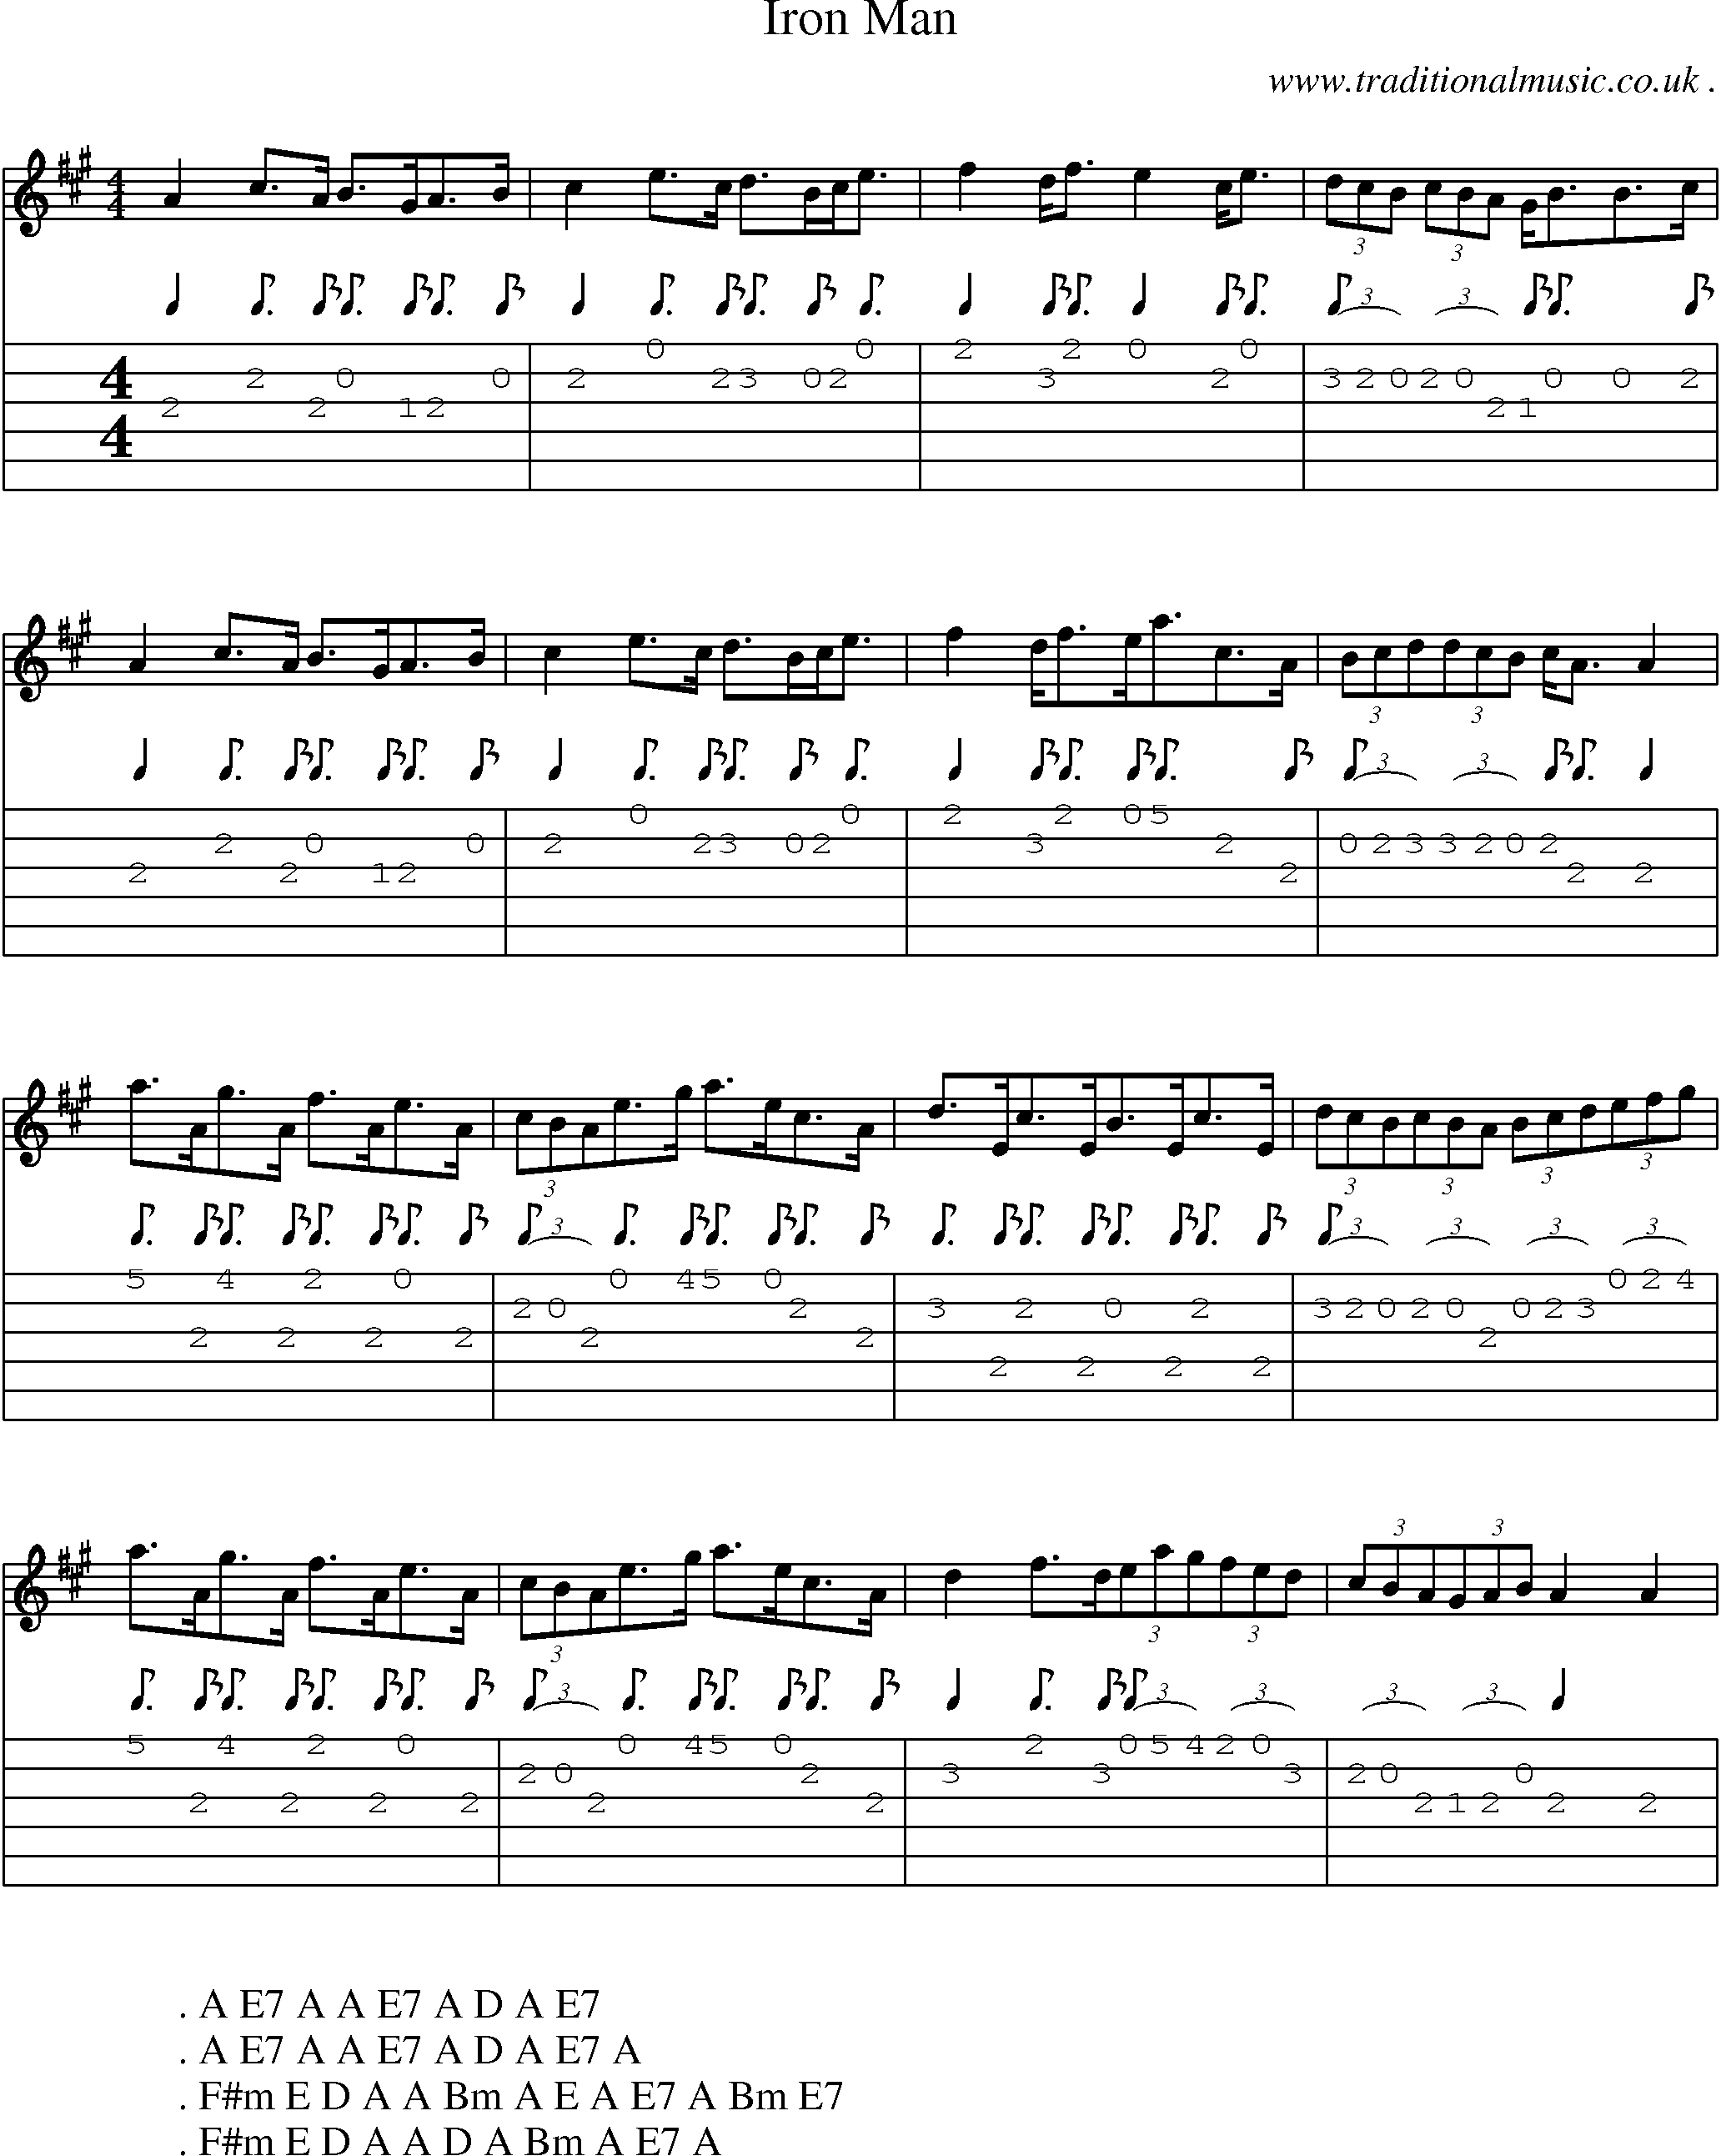 Sheet-Music and Guitar Tabs for Iron Man